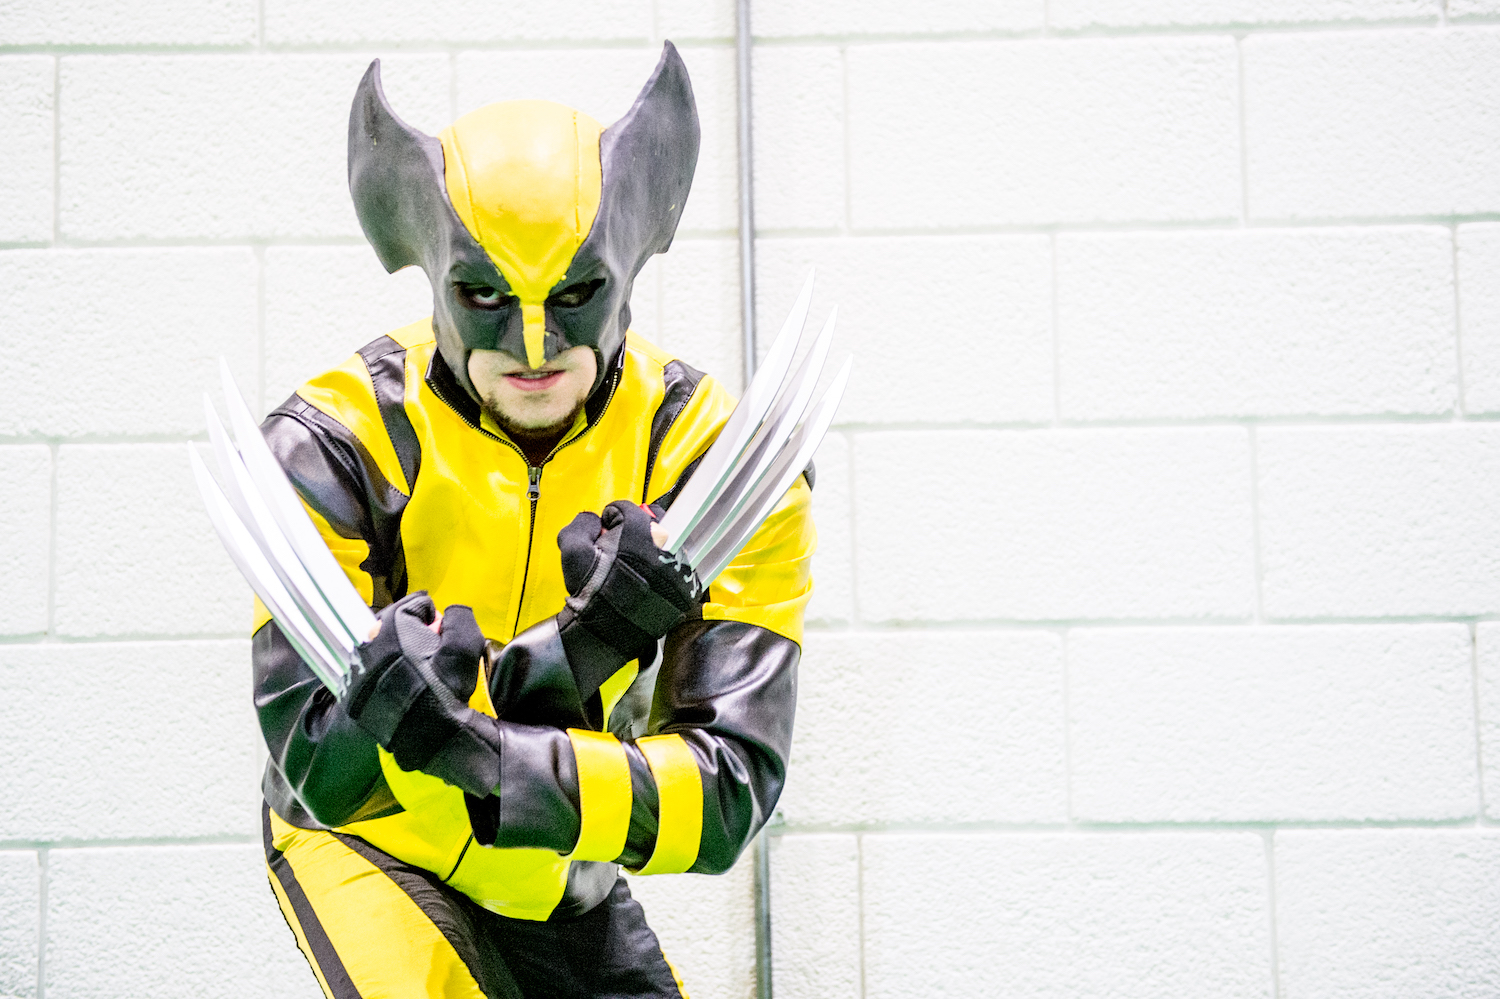 A cosplayer in character as Wolverine